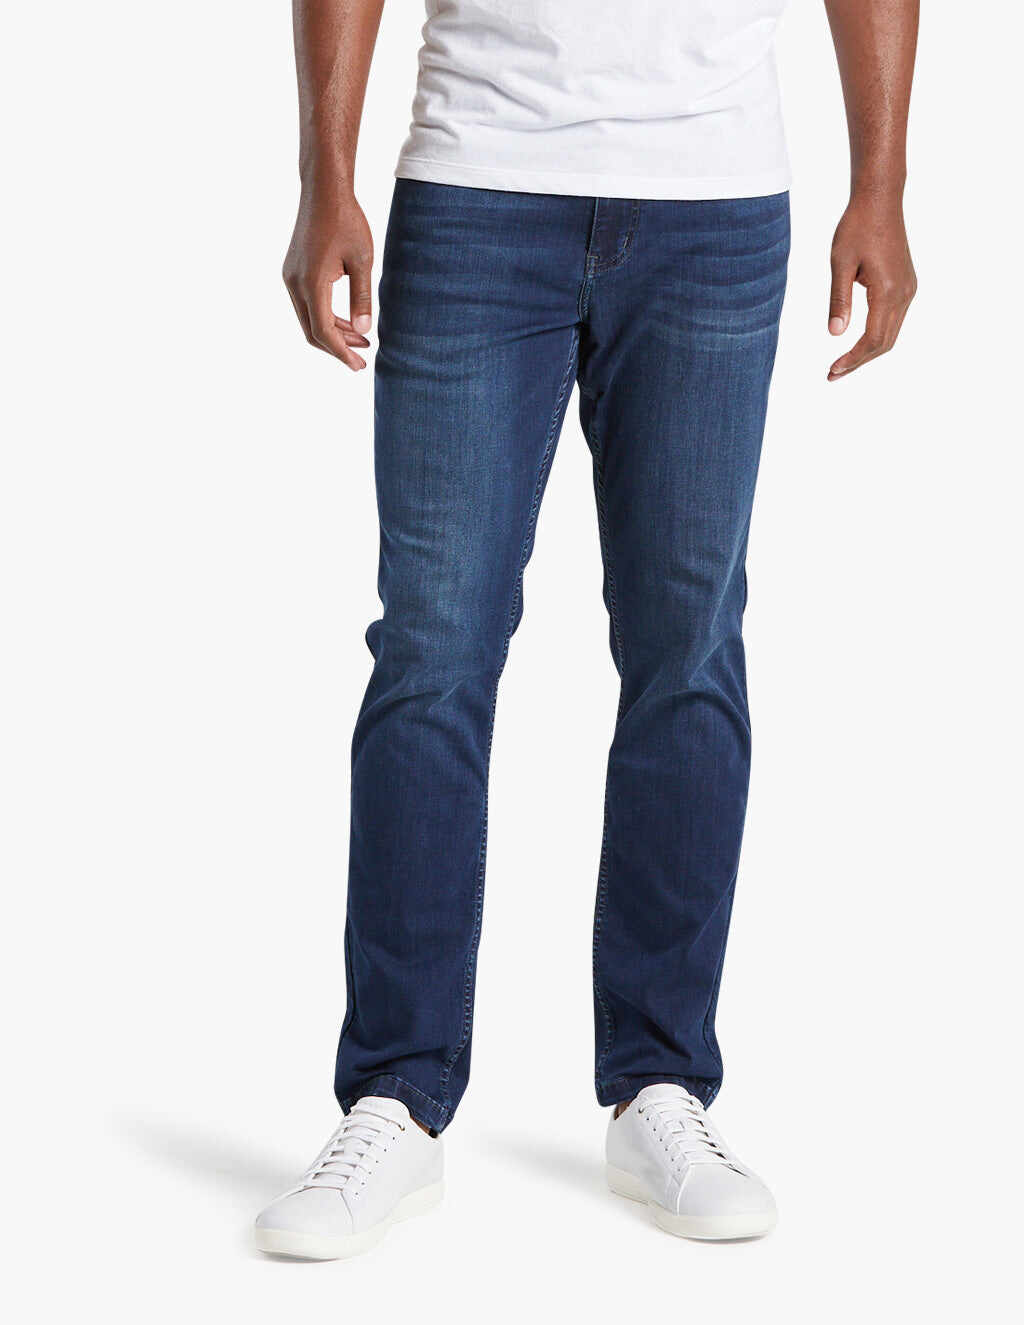 Hot sales50% OFF - Men's Perfect Jeans (Buy 2 free shipping)